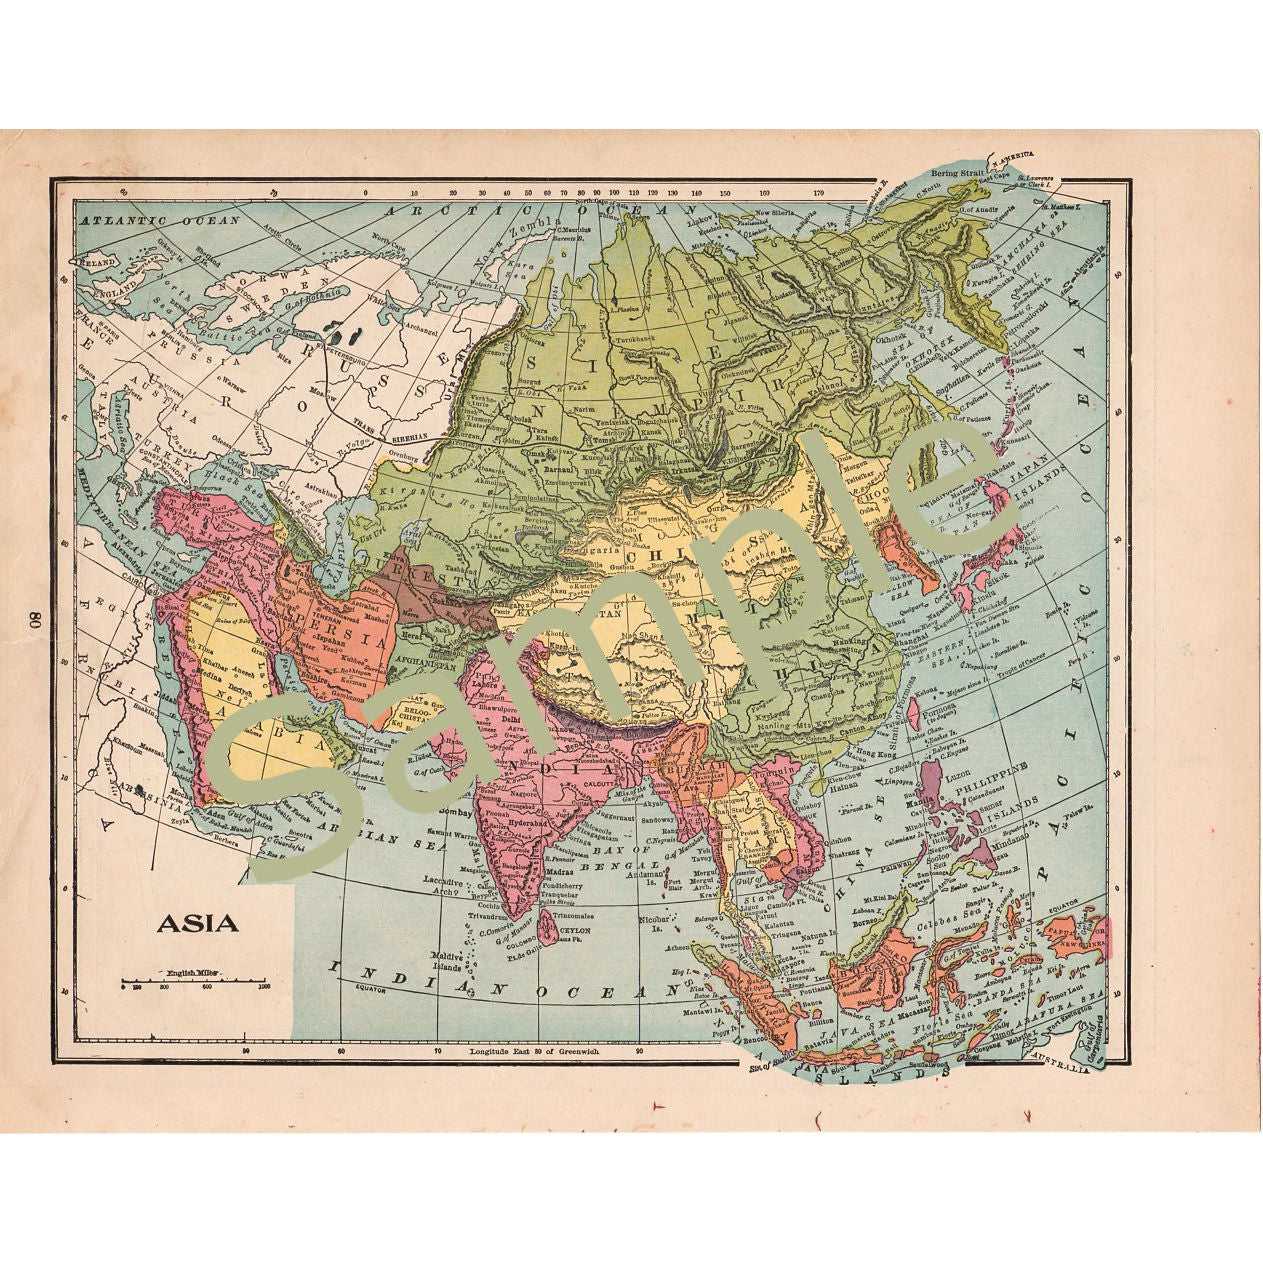 Printable Map Of Europe And Asia In The 1900